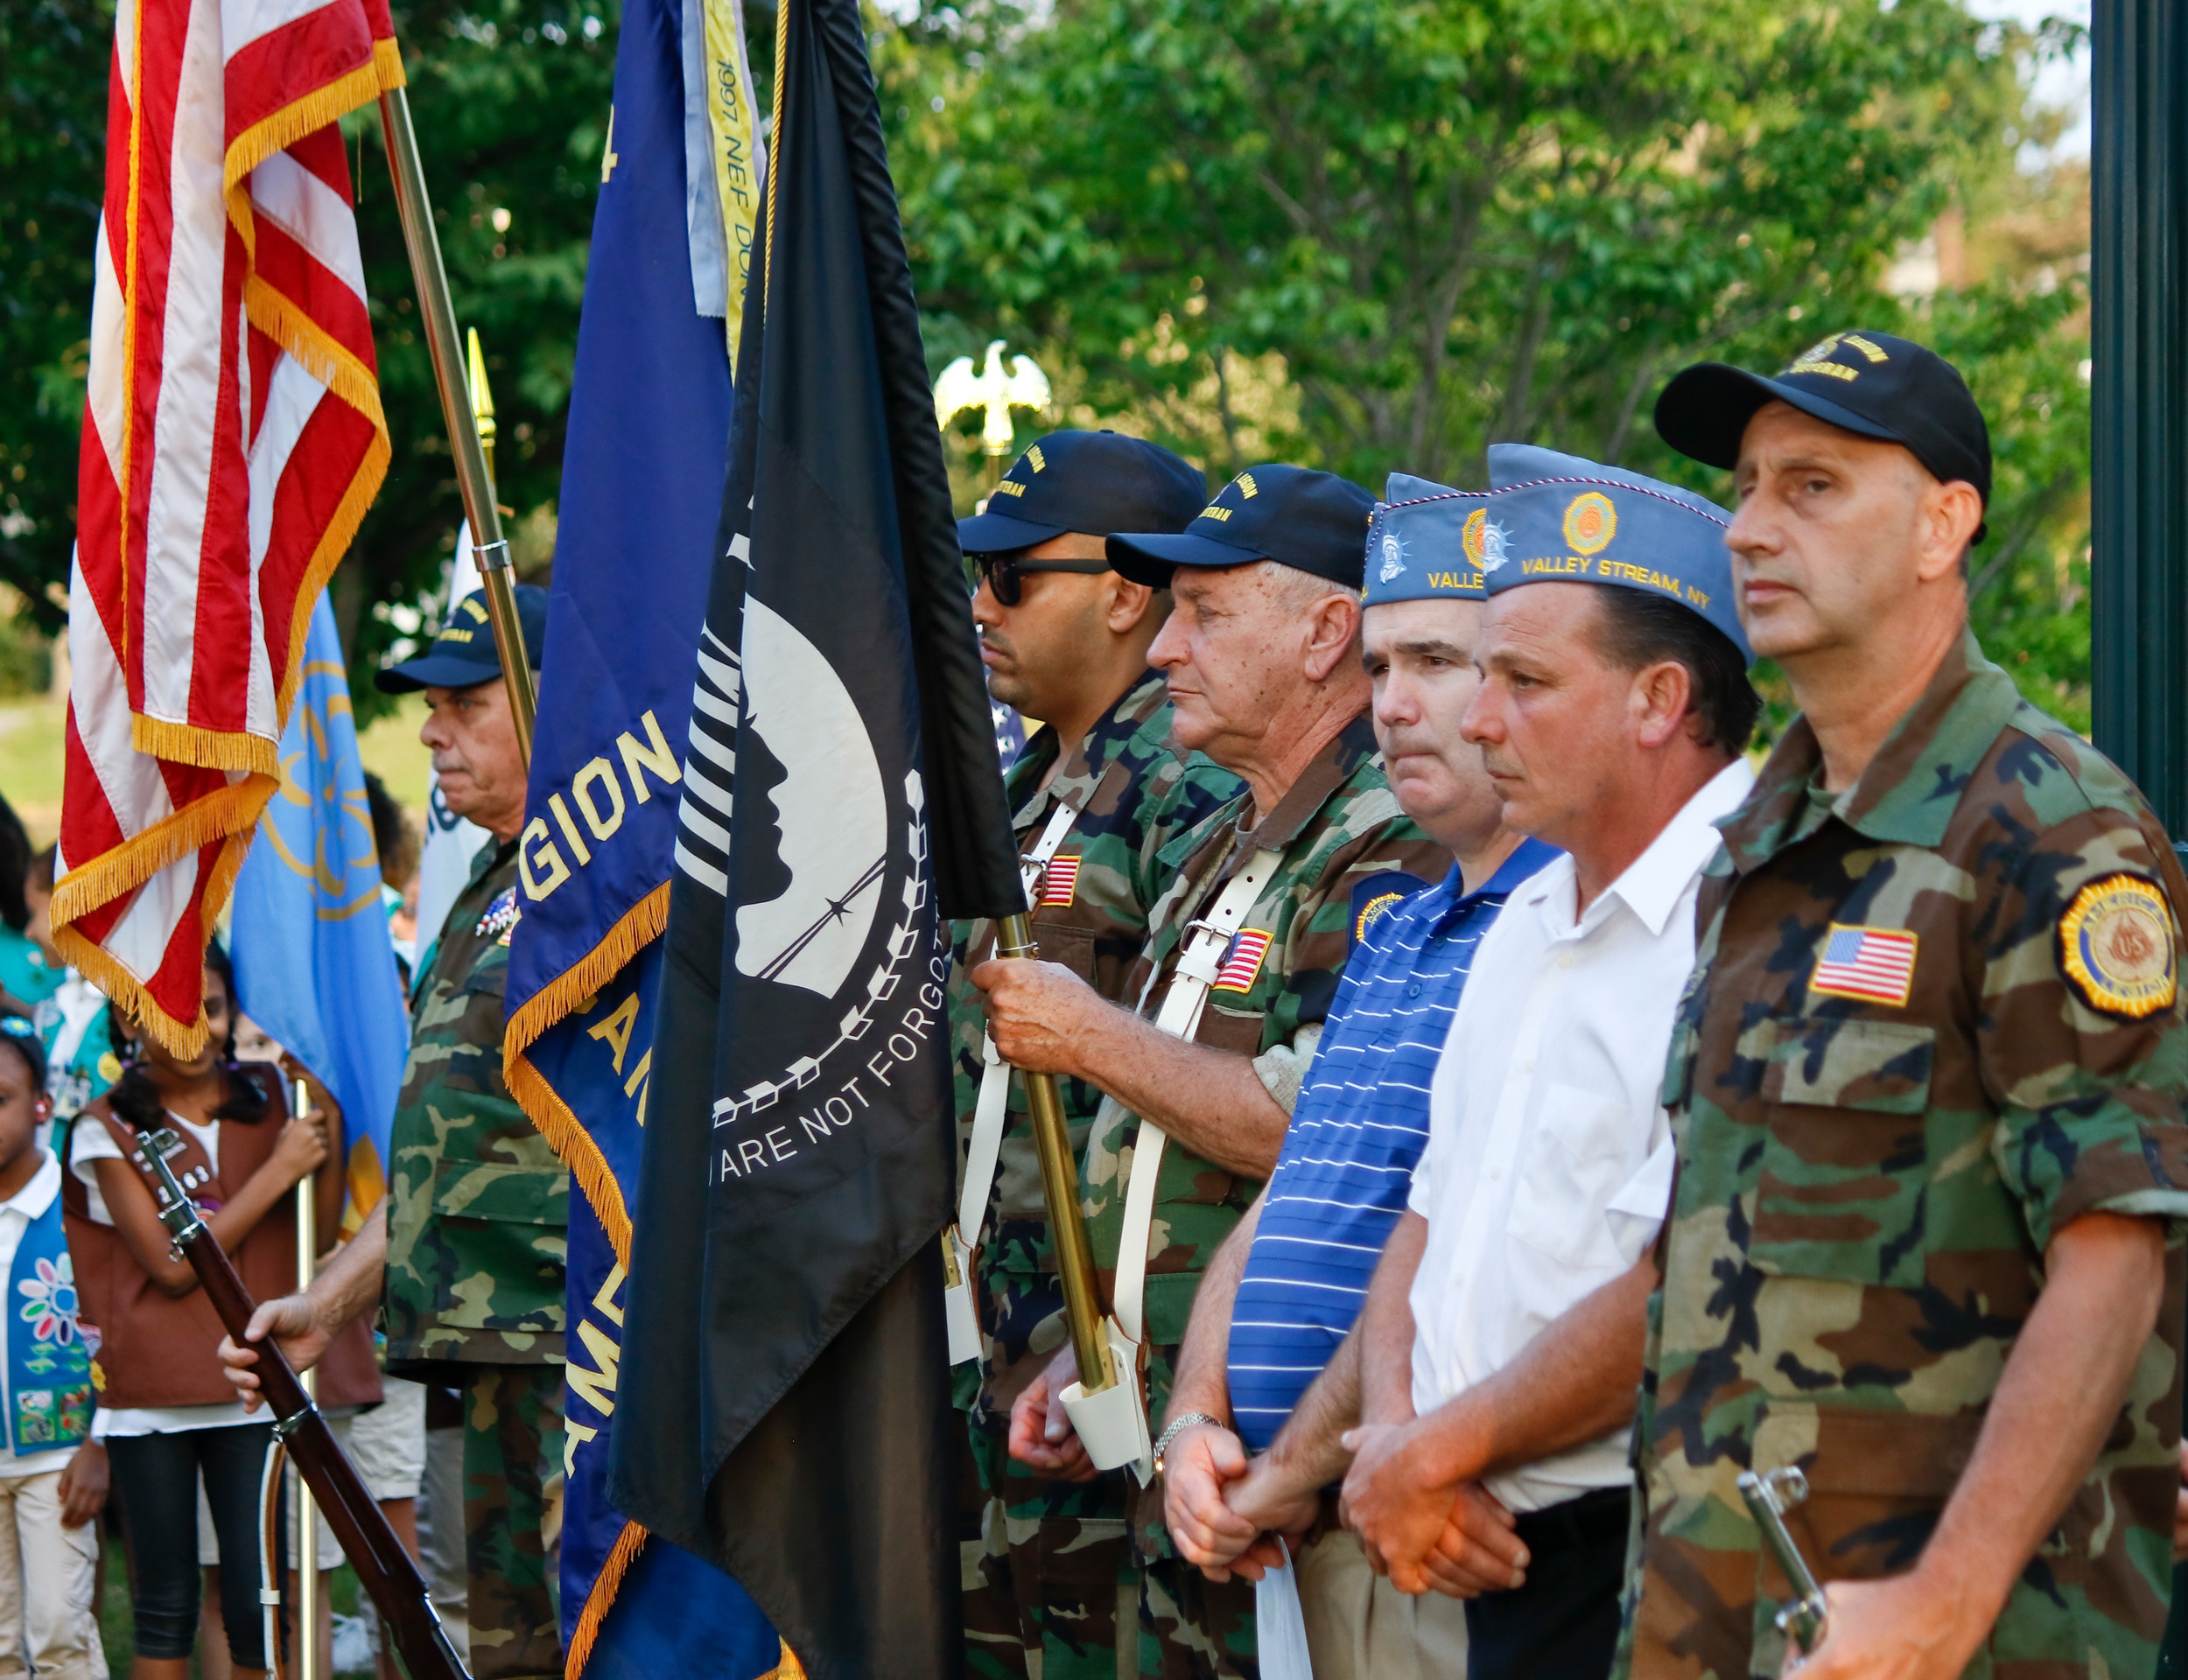 American Legion and Veteran of Foreign War members participated in the ceremony.